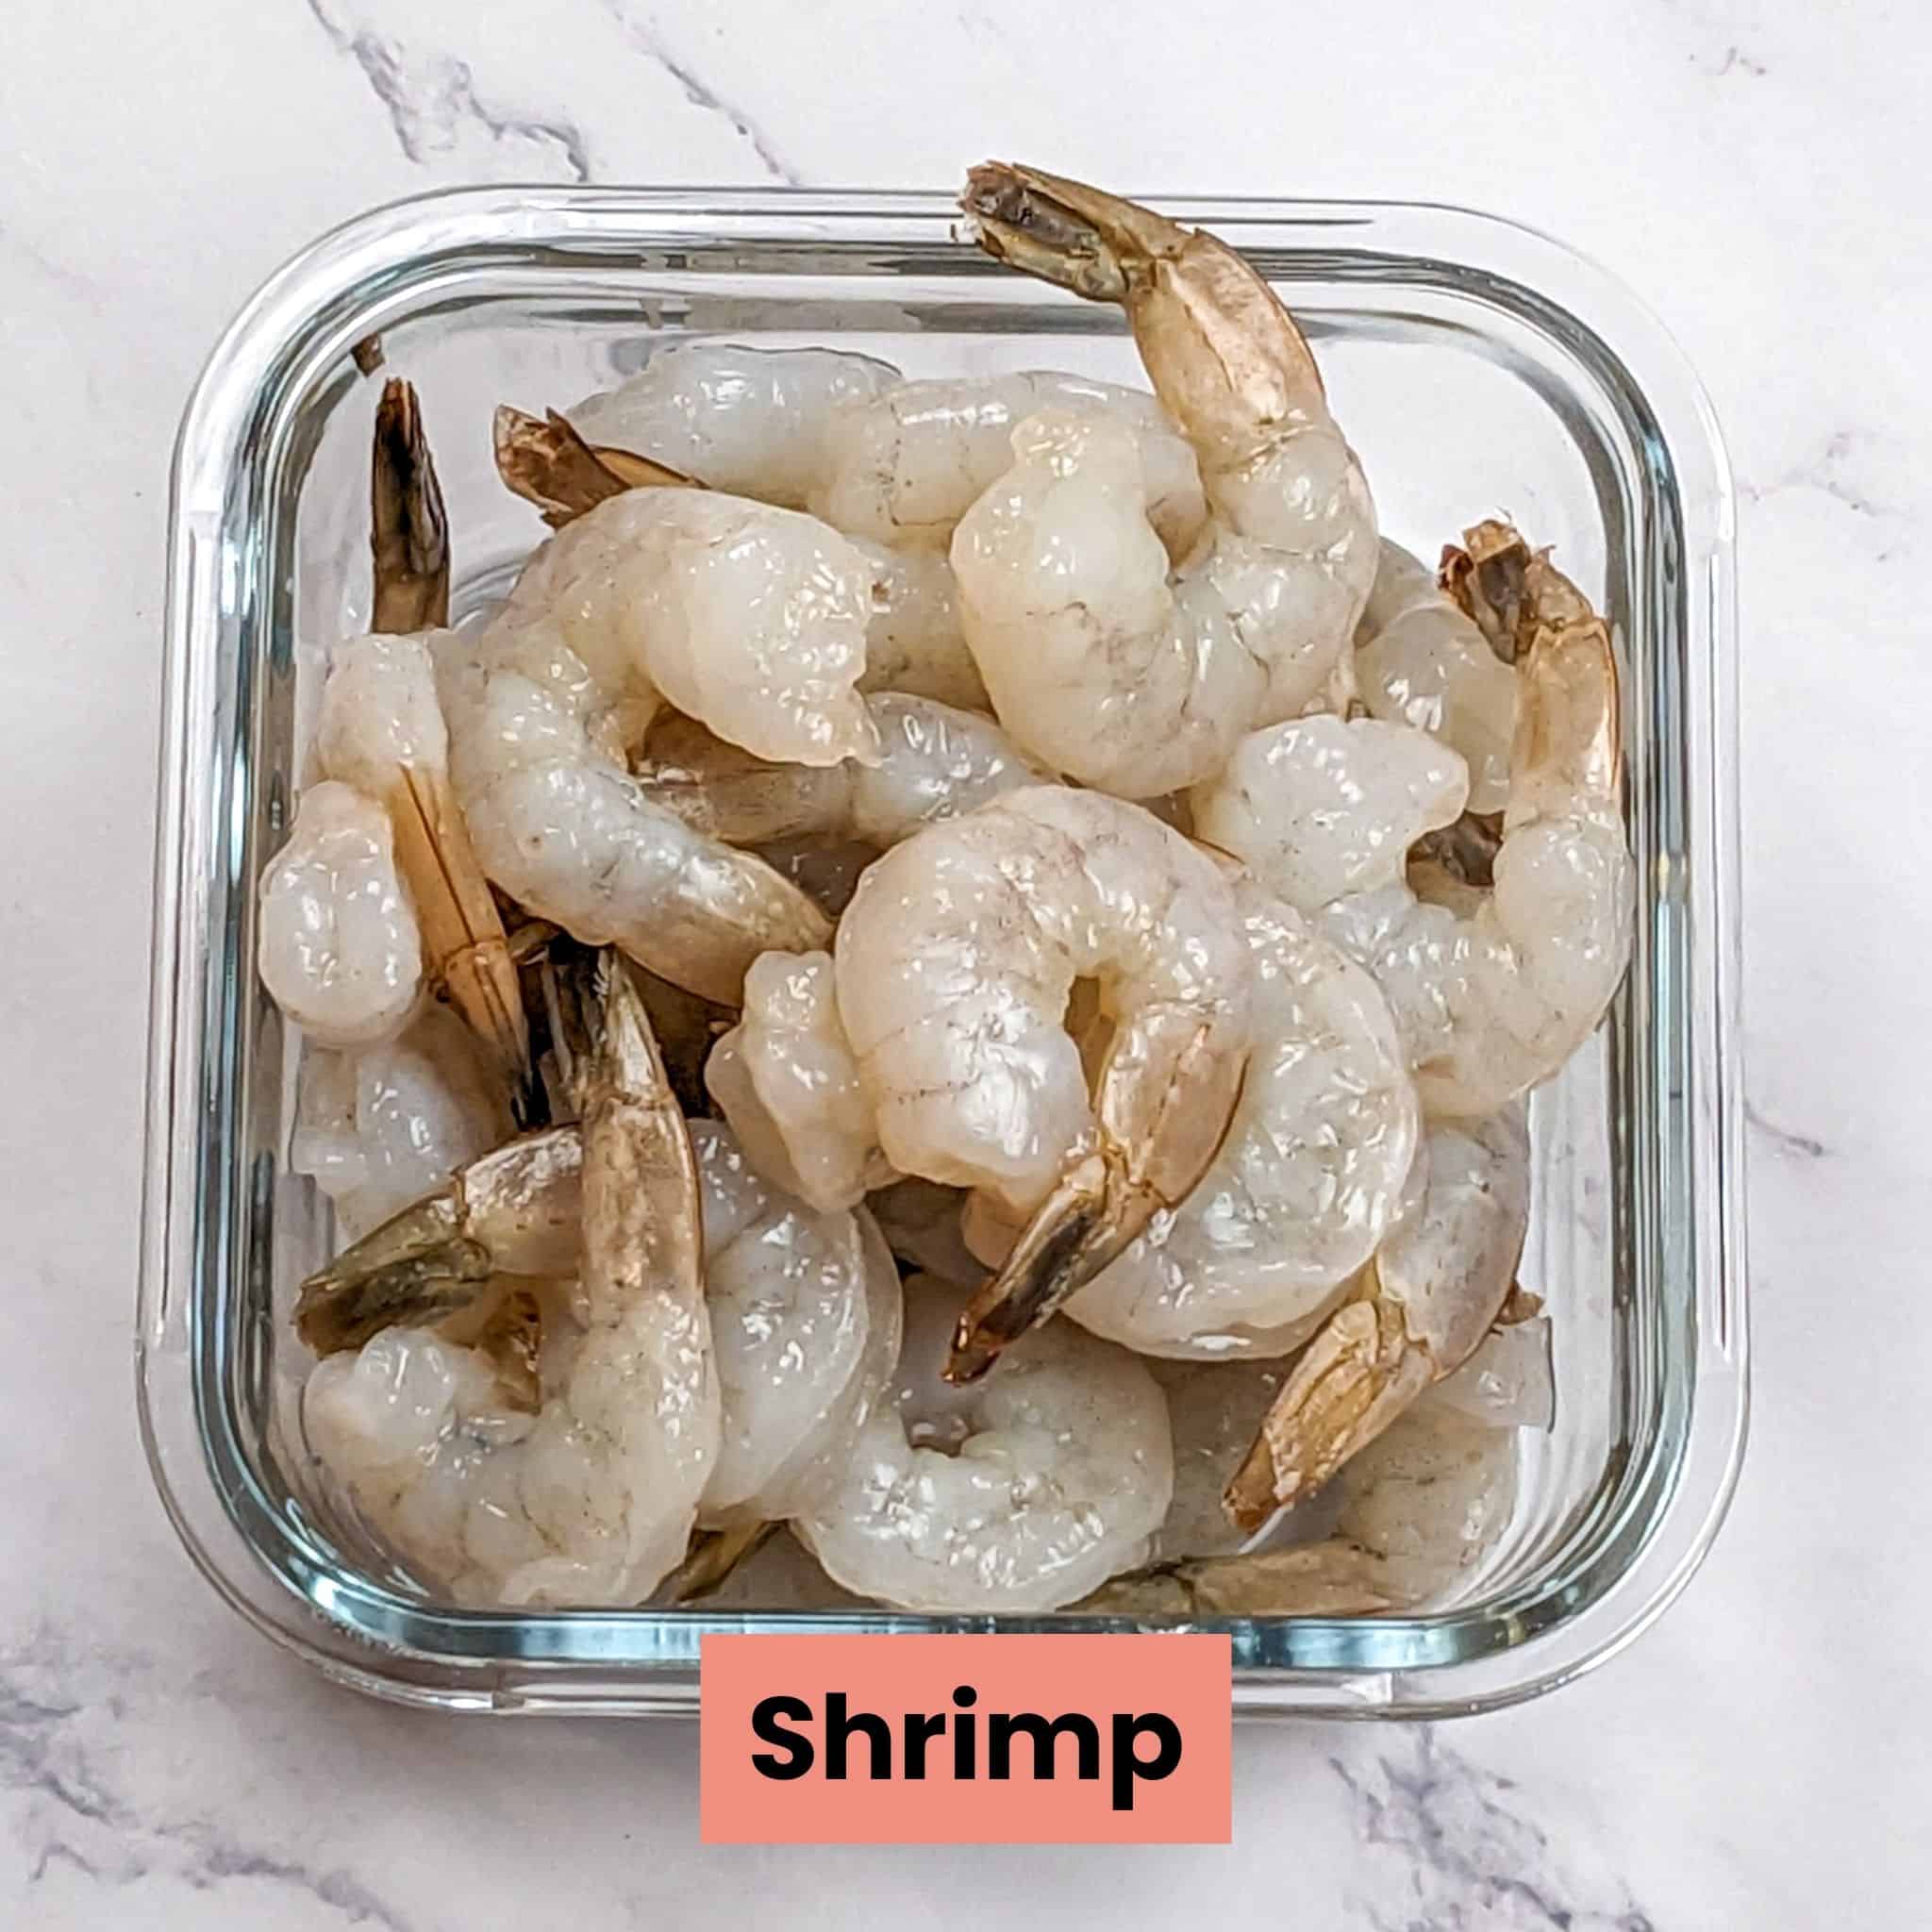 raw tail-on shrimp in a glass square clear dish